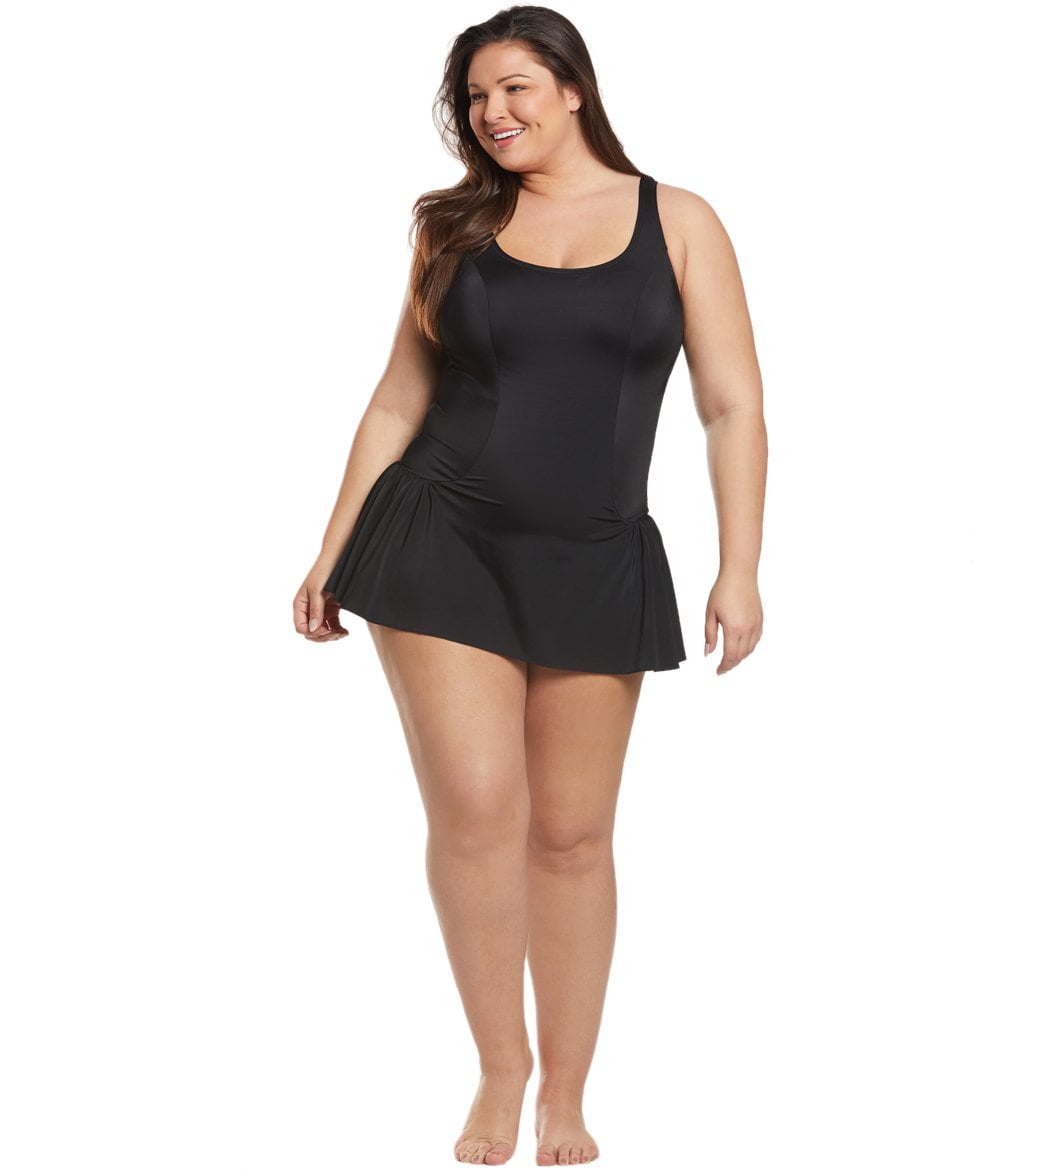 Plus Size Woman Dressed in Black Body Suit and Holding a Bottle of Water  Stock Photo - Image of cute, jump: 170769822